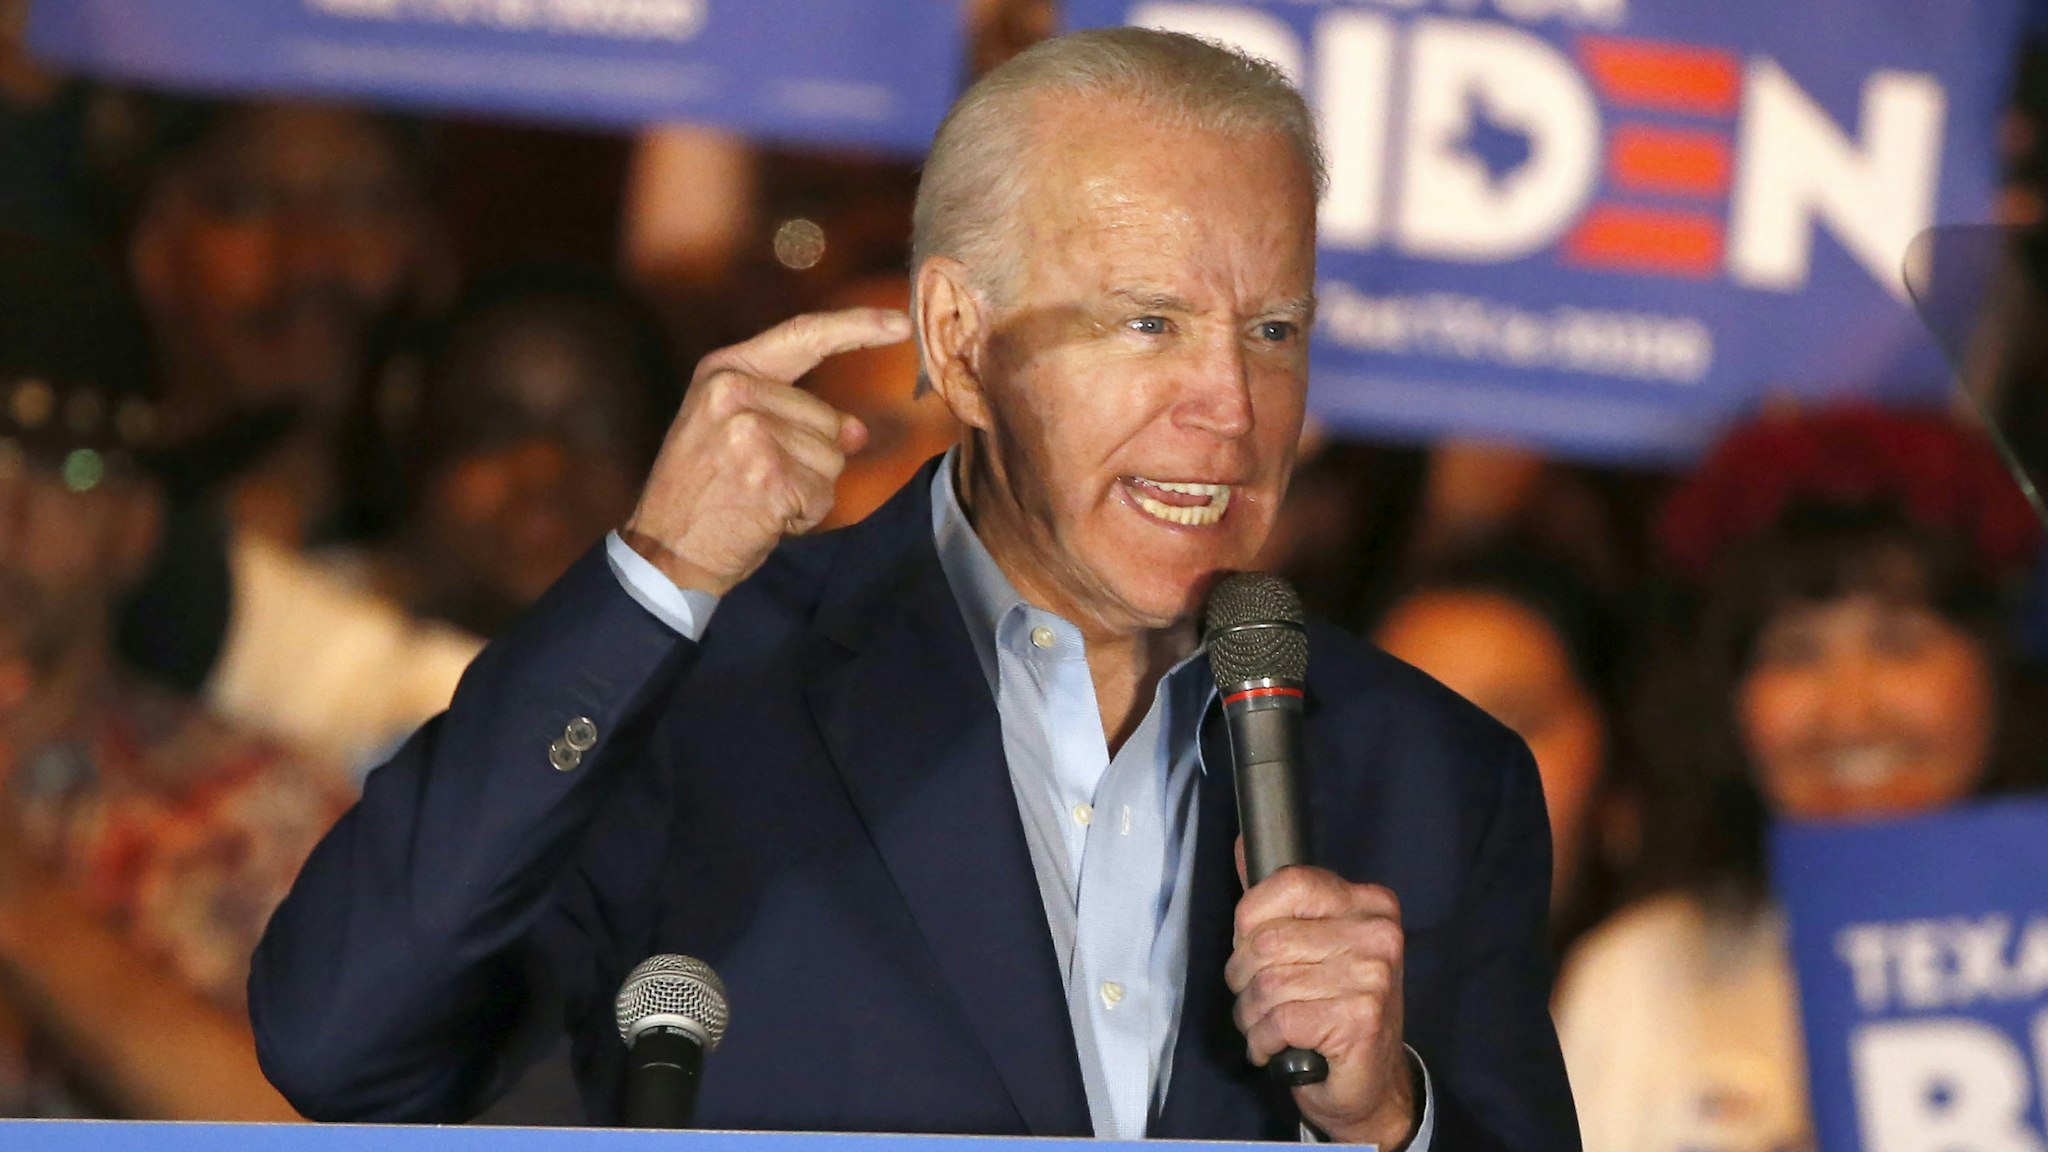 DALLAS, TX - MARCH 02: Democratic presidential candidate former Vice President Joe Biden speaks during a campaign event on March 2, 2020 in Dallas, Texas. Biden continues to campaign before the upcoming Super Tuesday Democratic presidential primaries.